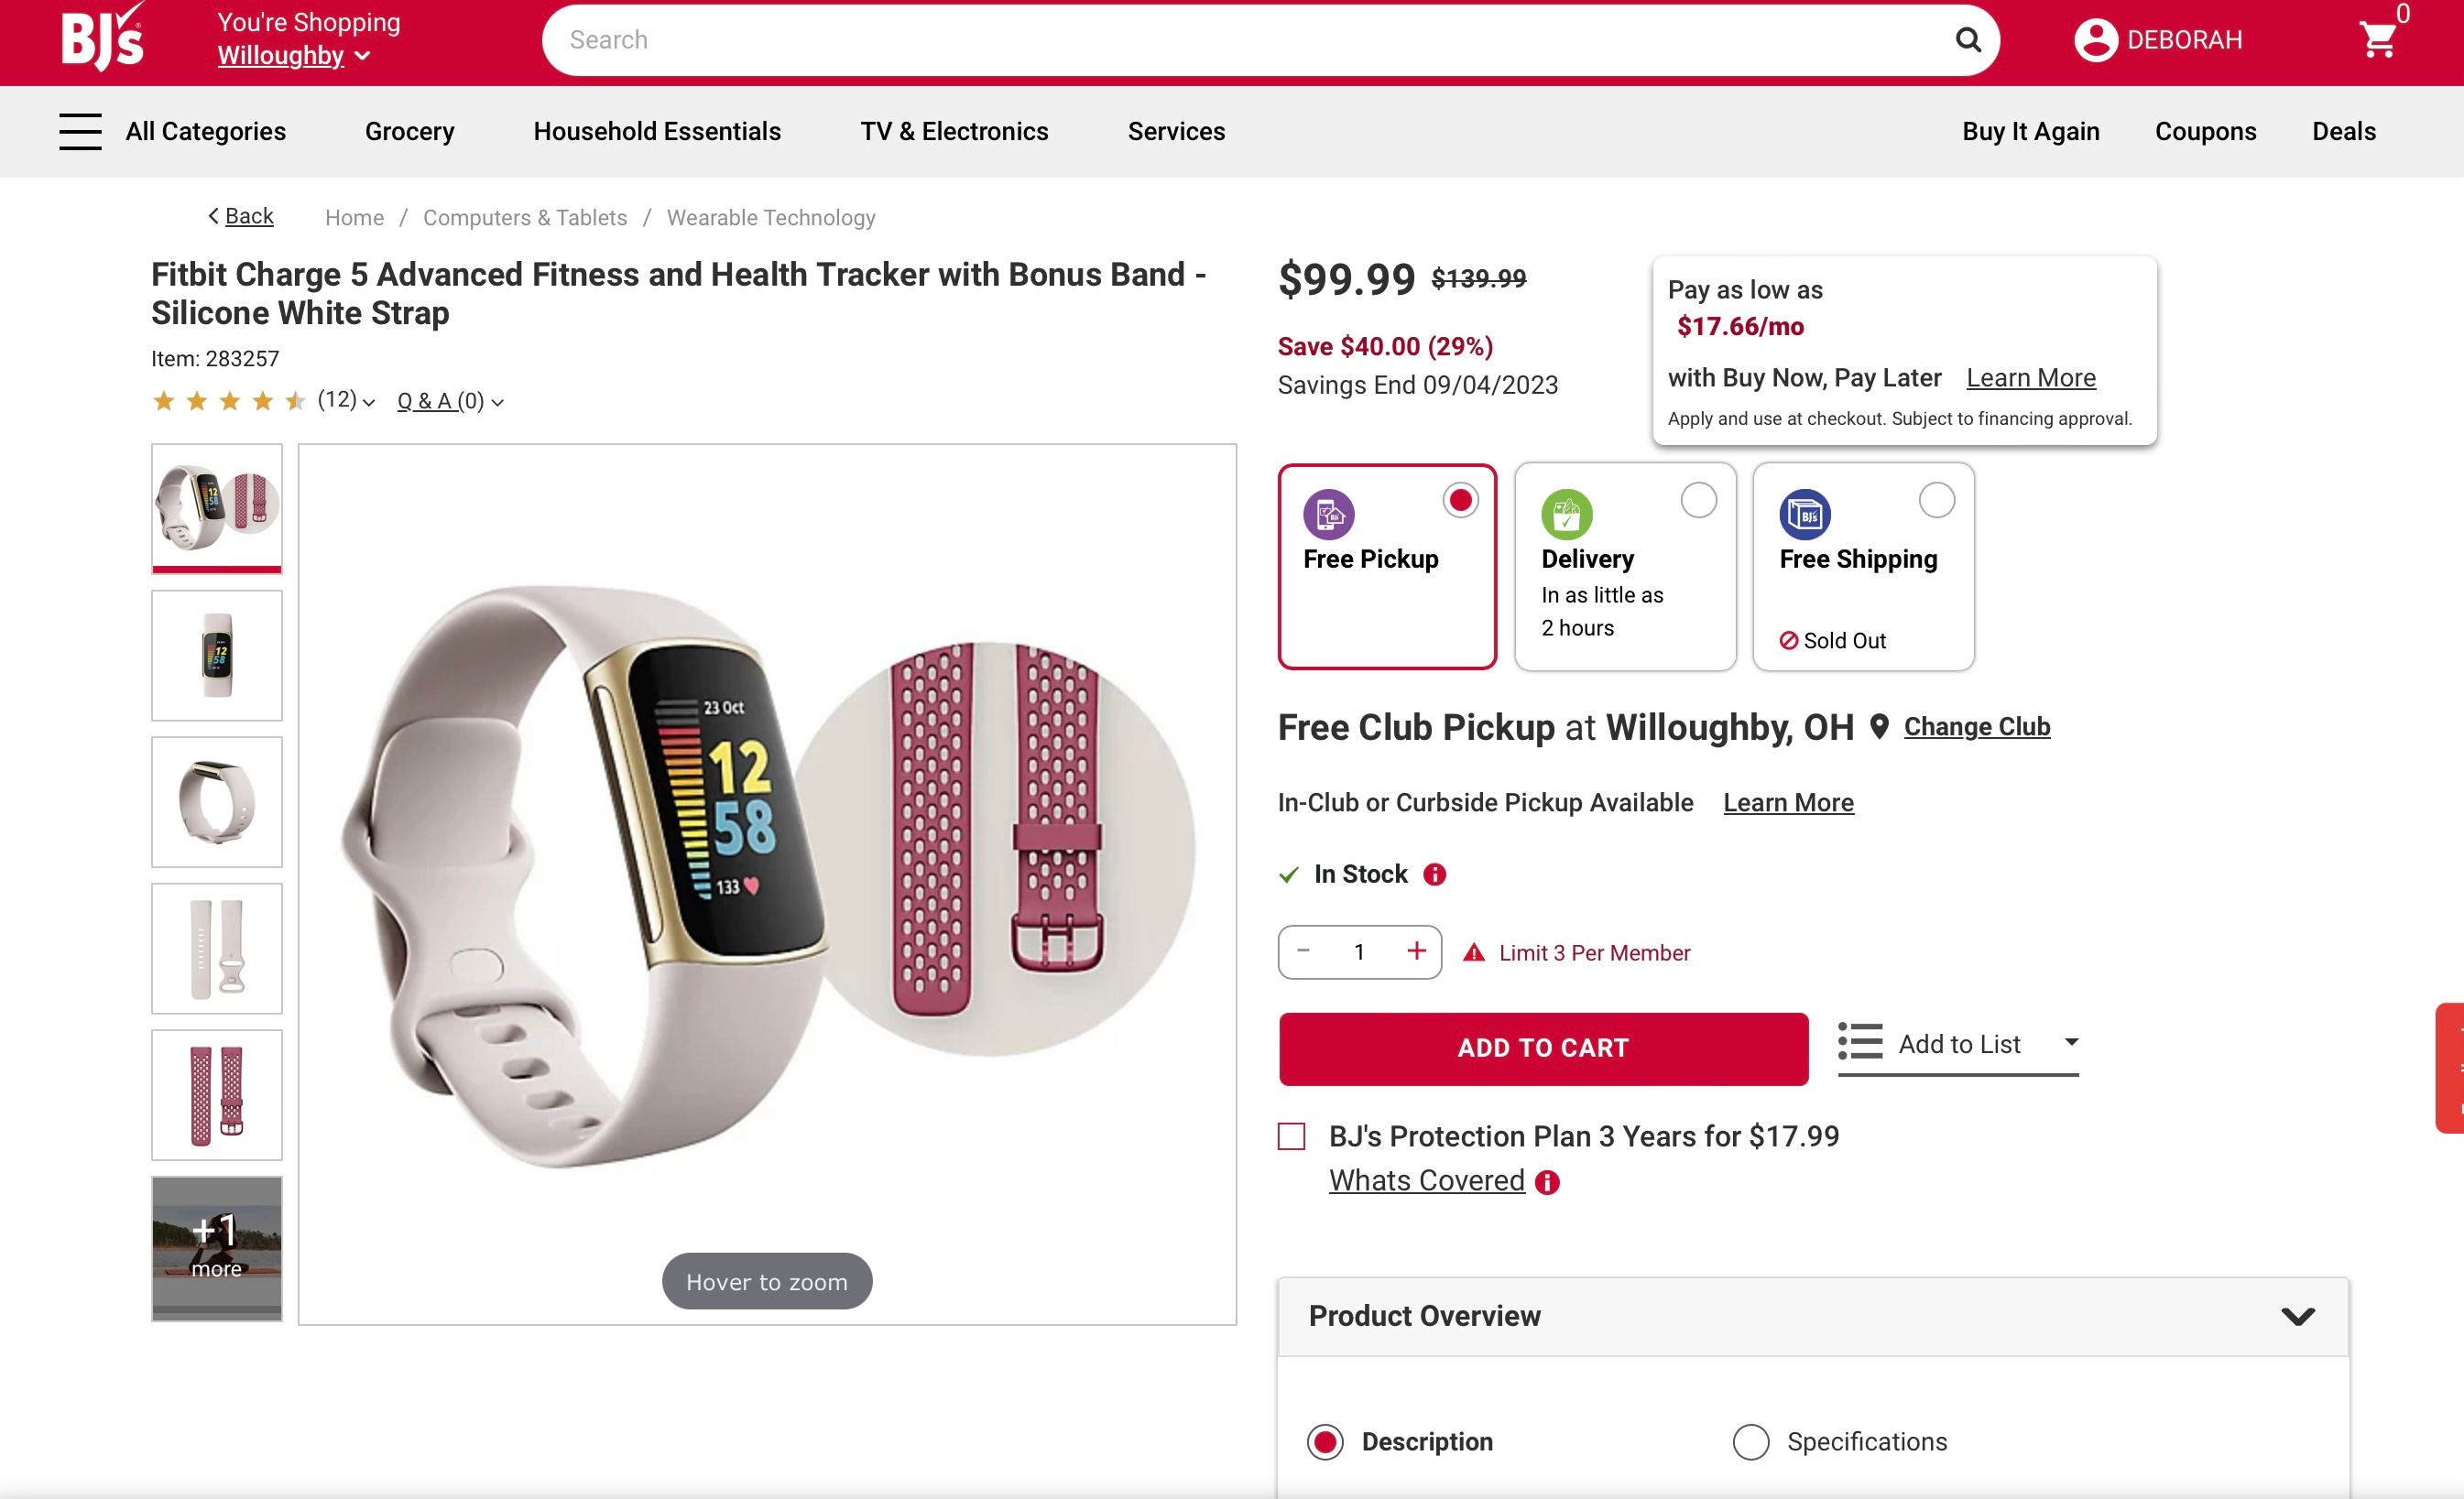 Save almost $50 with this Fitbit Charge 5 deal. Hurry, before it sells out!